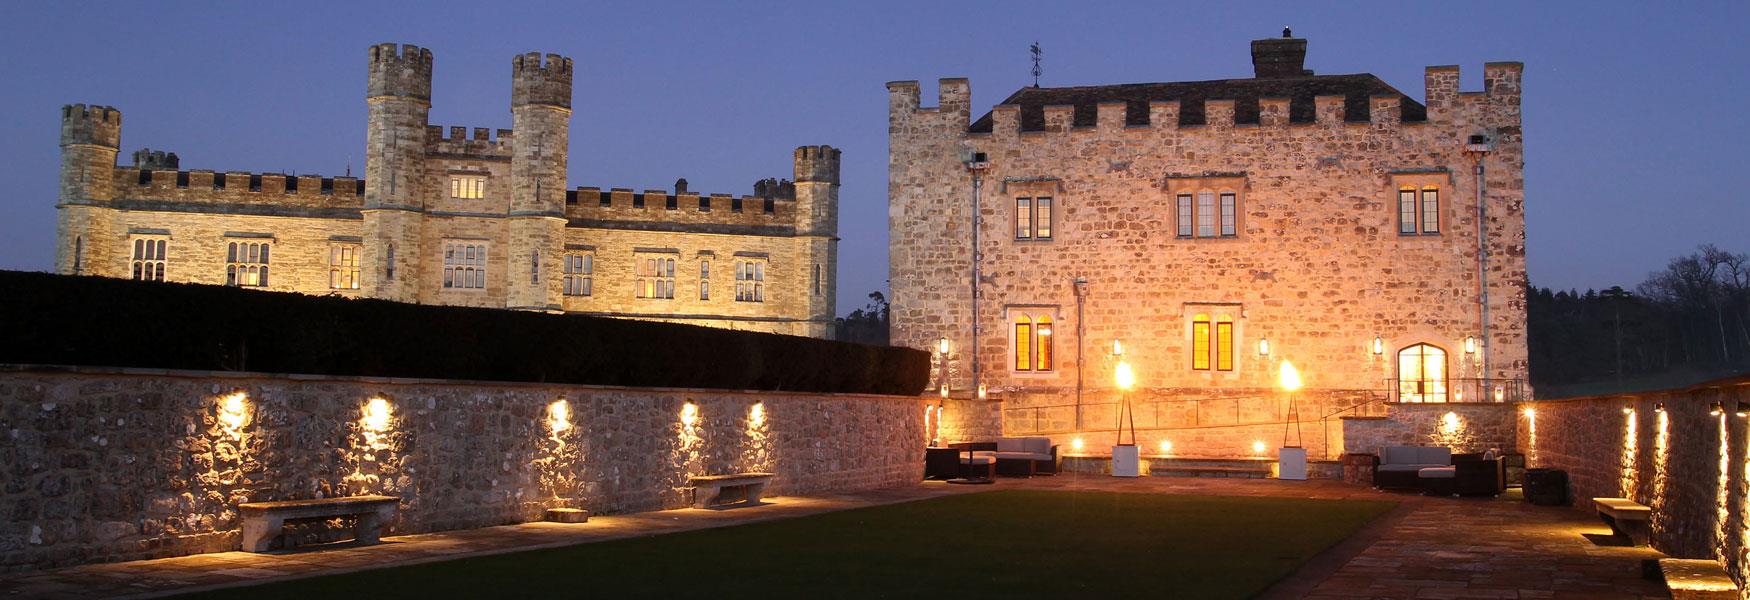 Leeds Castle and the Maidens Tower lit at night